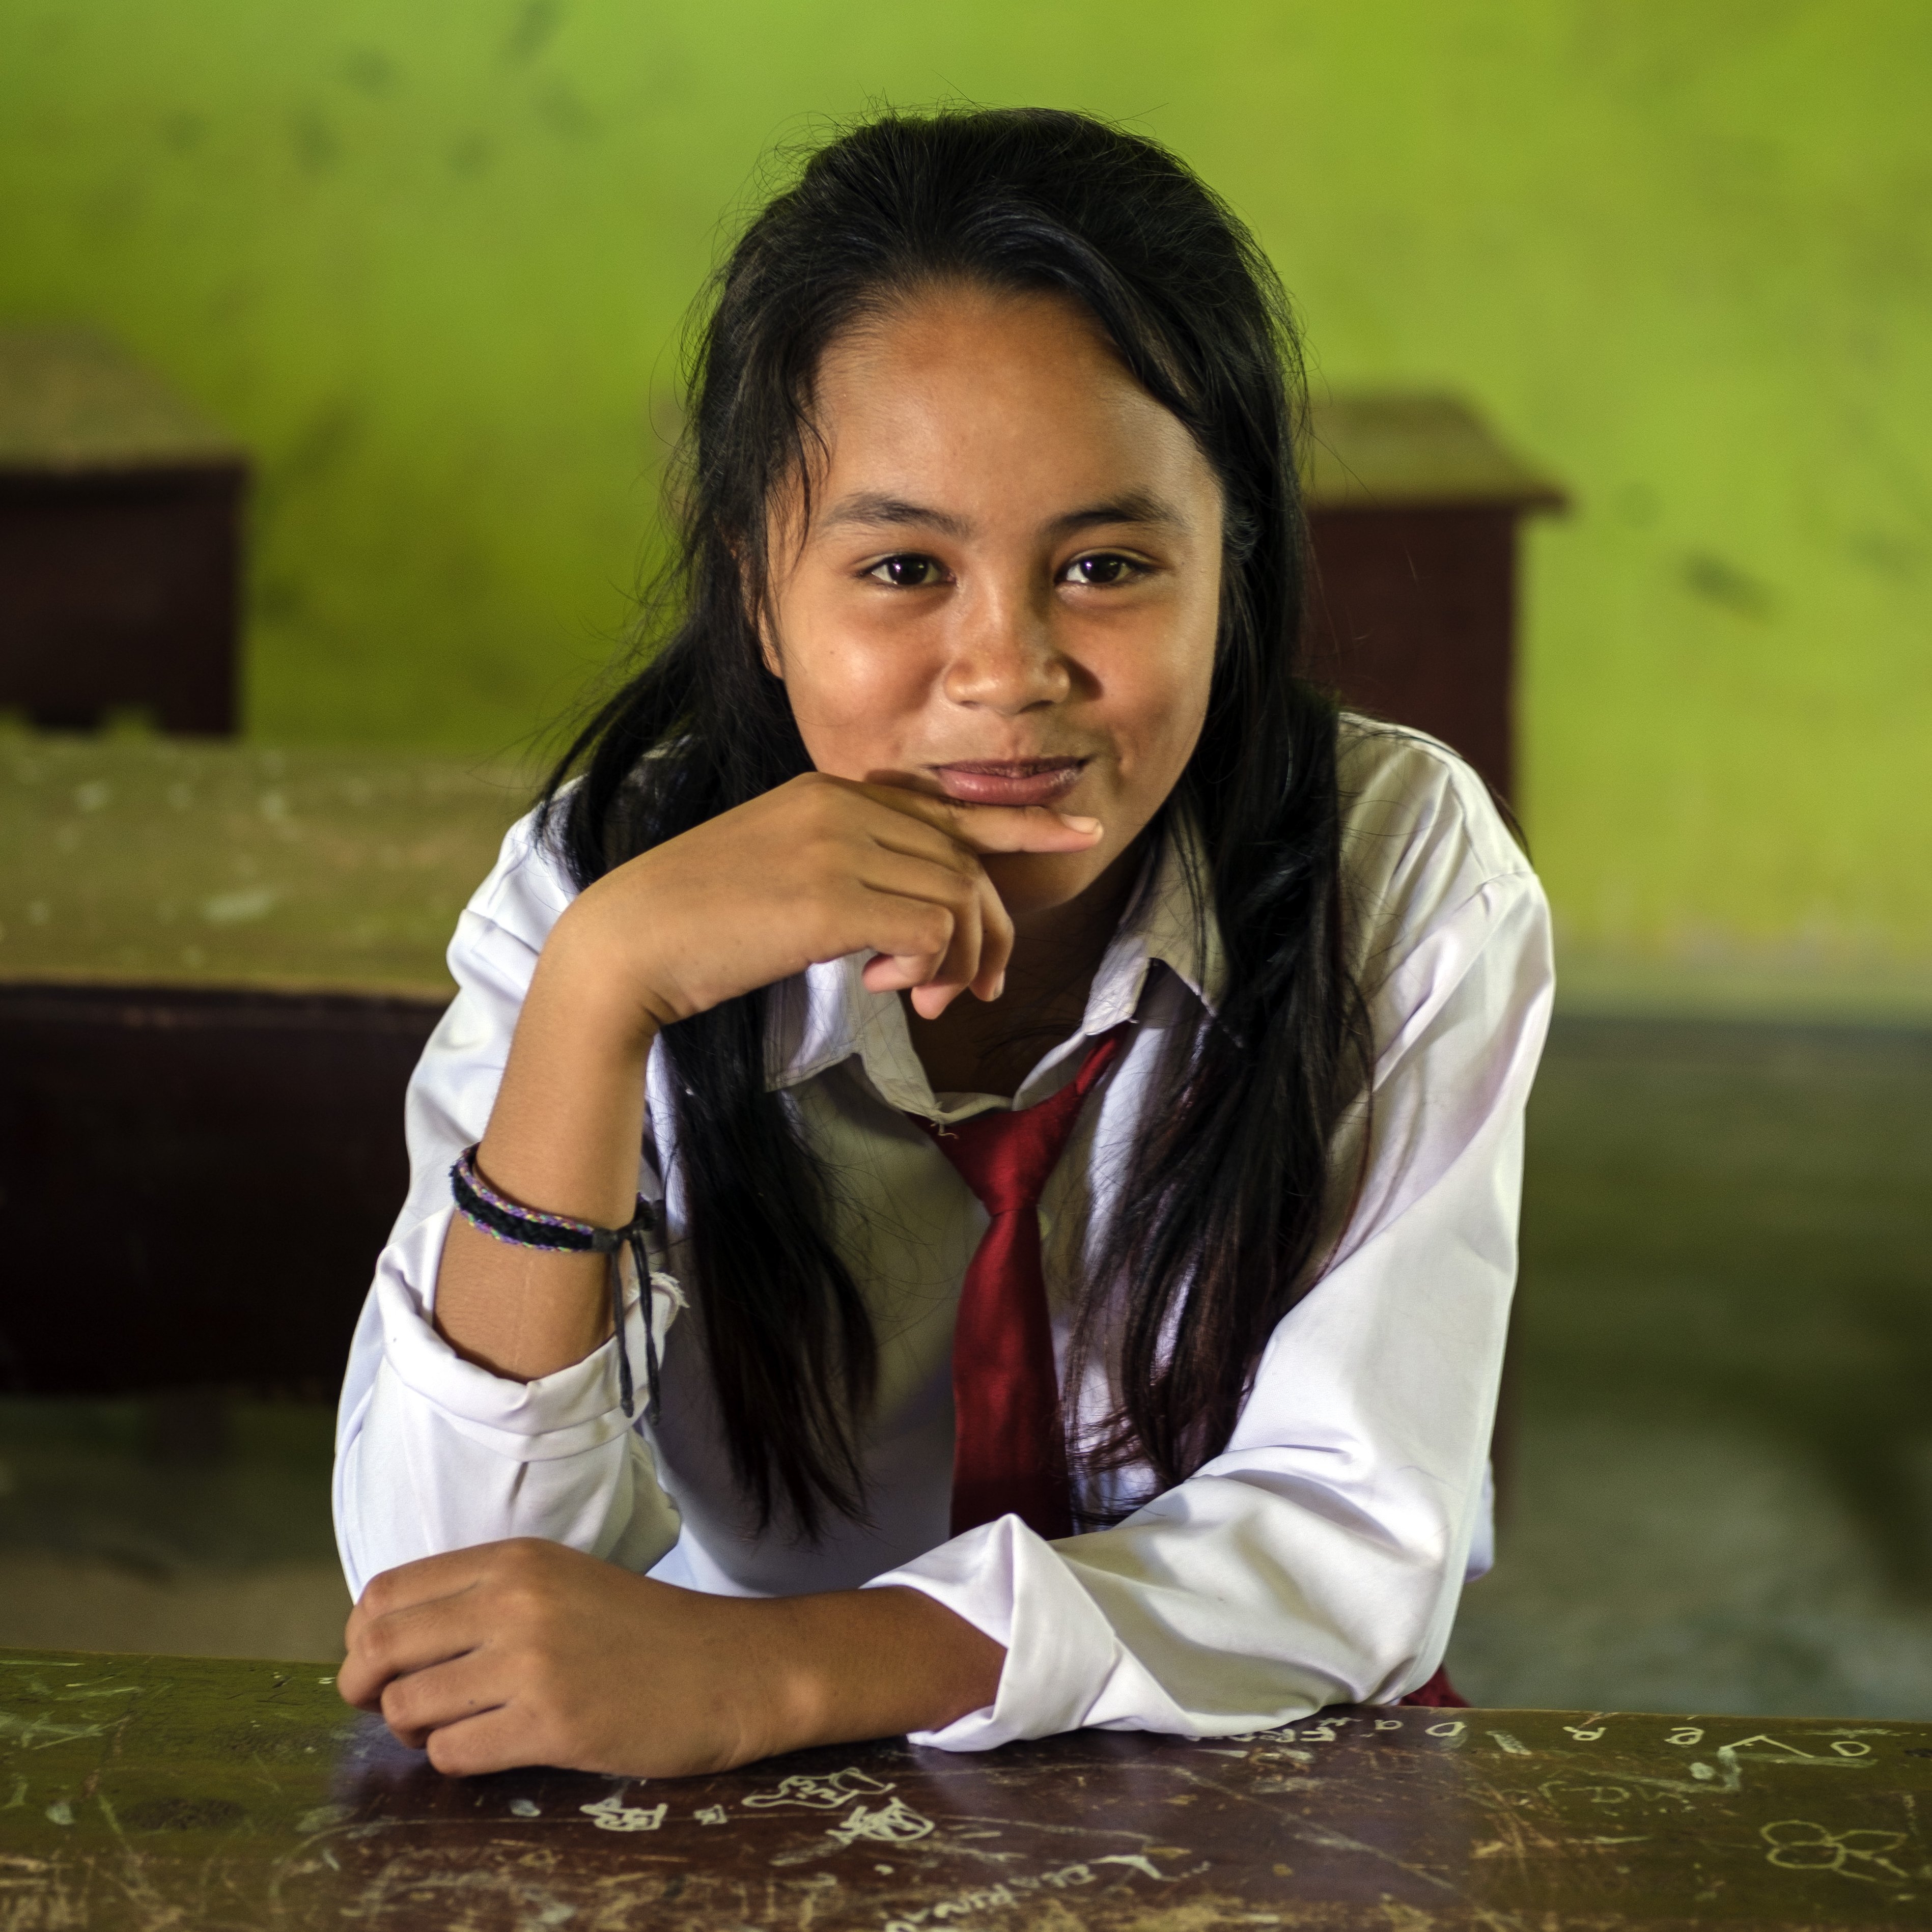 12-year old Marzela smiles while sitting at a desk in her elementary school Central Sulawesi, Indonesia. Marzela lost her home during the deadly 2018 Indonesia earthquake and tsunami. Her family received a multi-purpose grant from Save the Children to rebuild their lives. Photo credit: Jiro Ose / Save the Children, Feb 2019